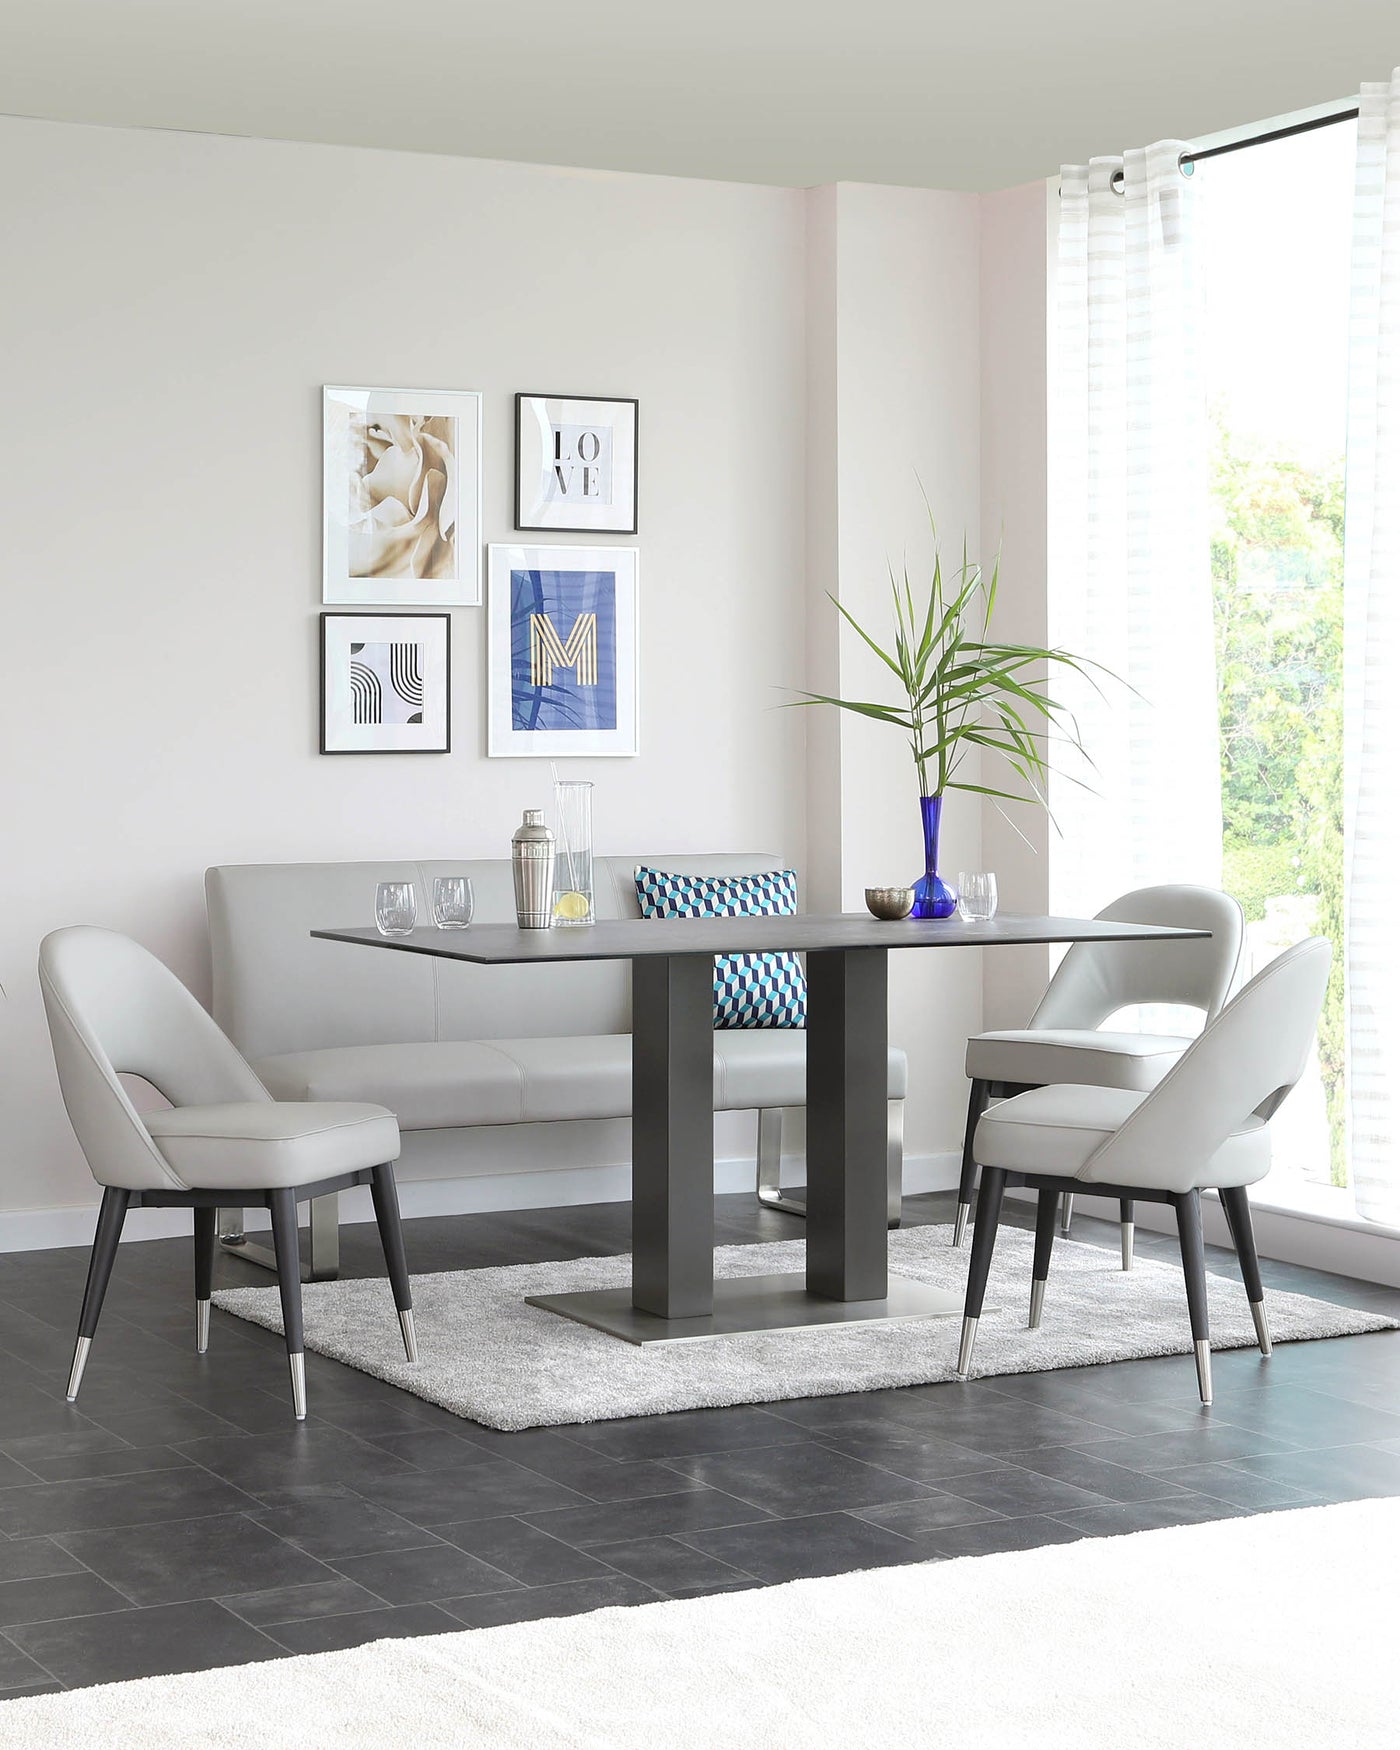 Modern dining room furniture featuring a sleek black table with a rectangular top and wide, flat legs, paired with three light grey upholstered chairs with curved backs and metallic legs. A matching light grey upholstered bench is set against the wall under framed artwork. The set is arranged on a plush grey area rug over dark tiled flooring.